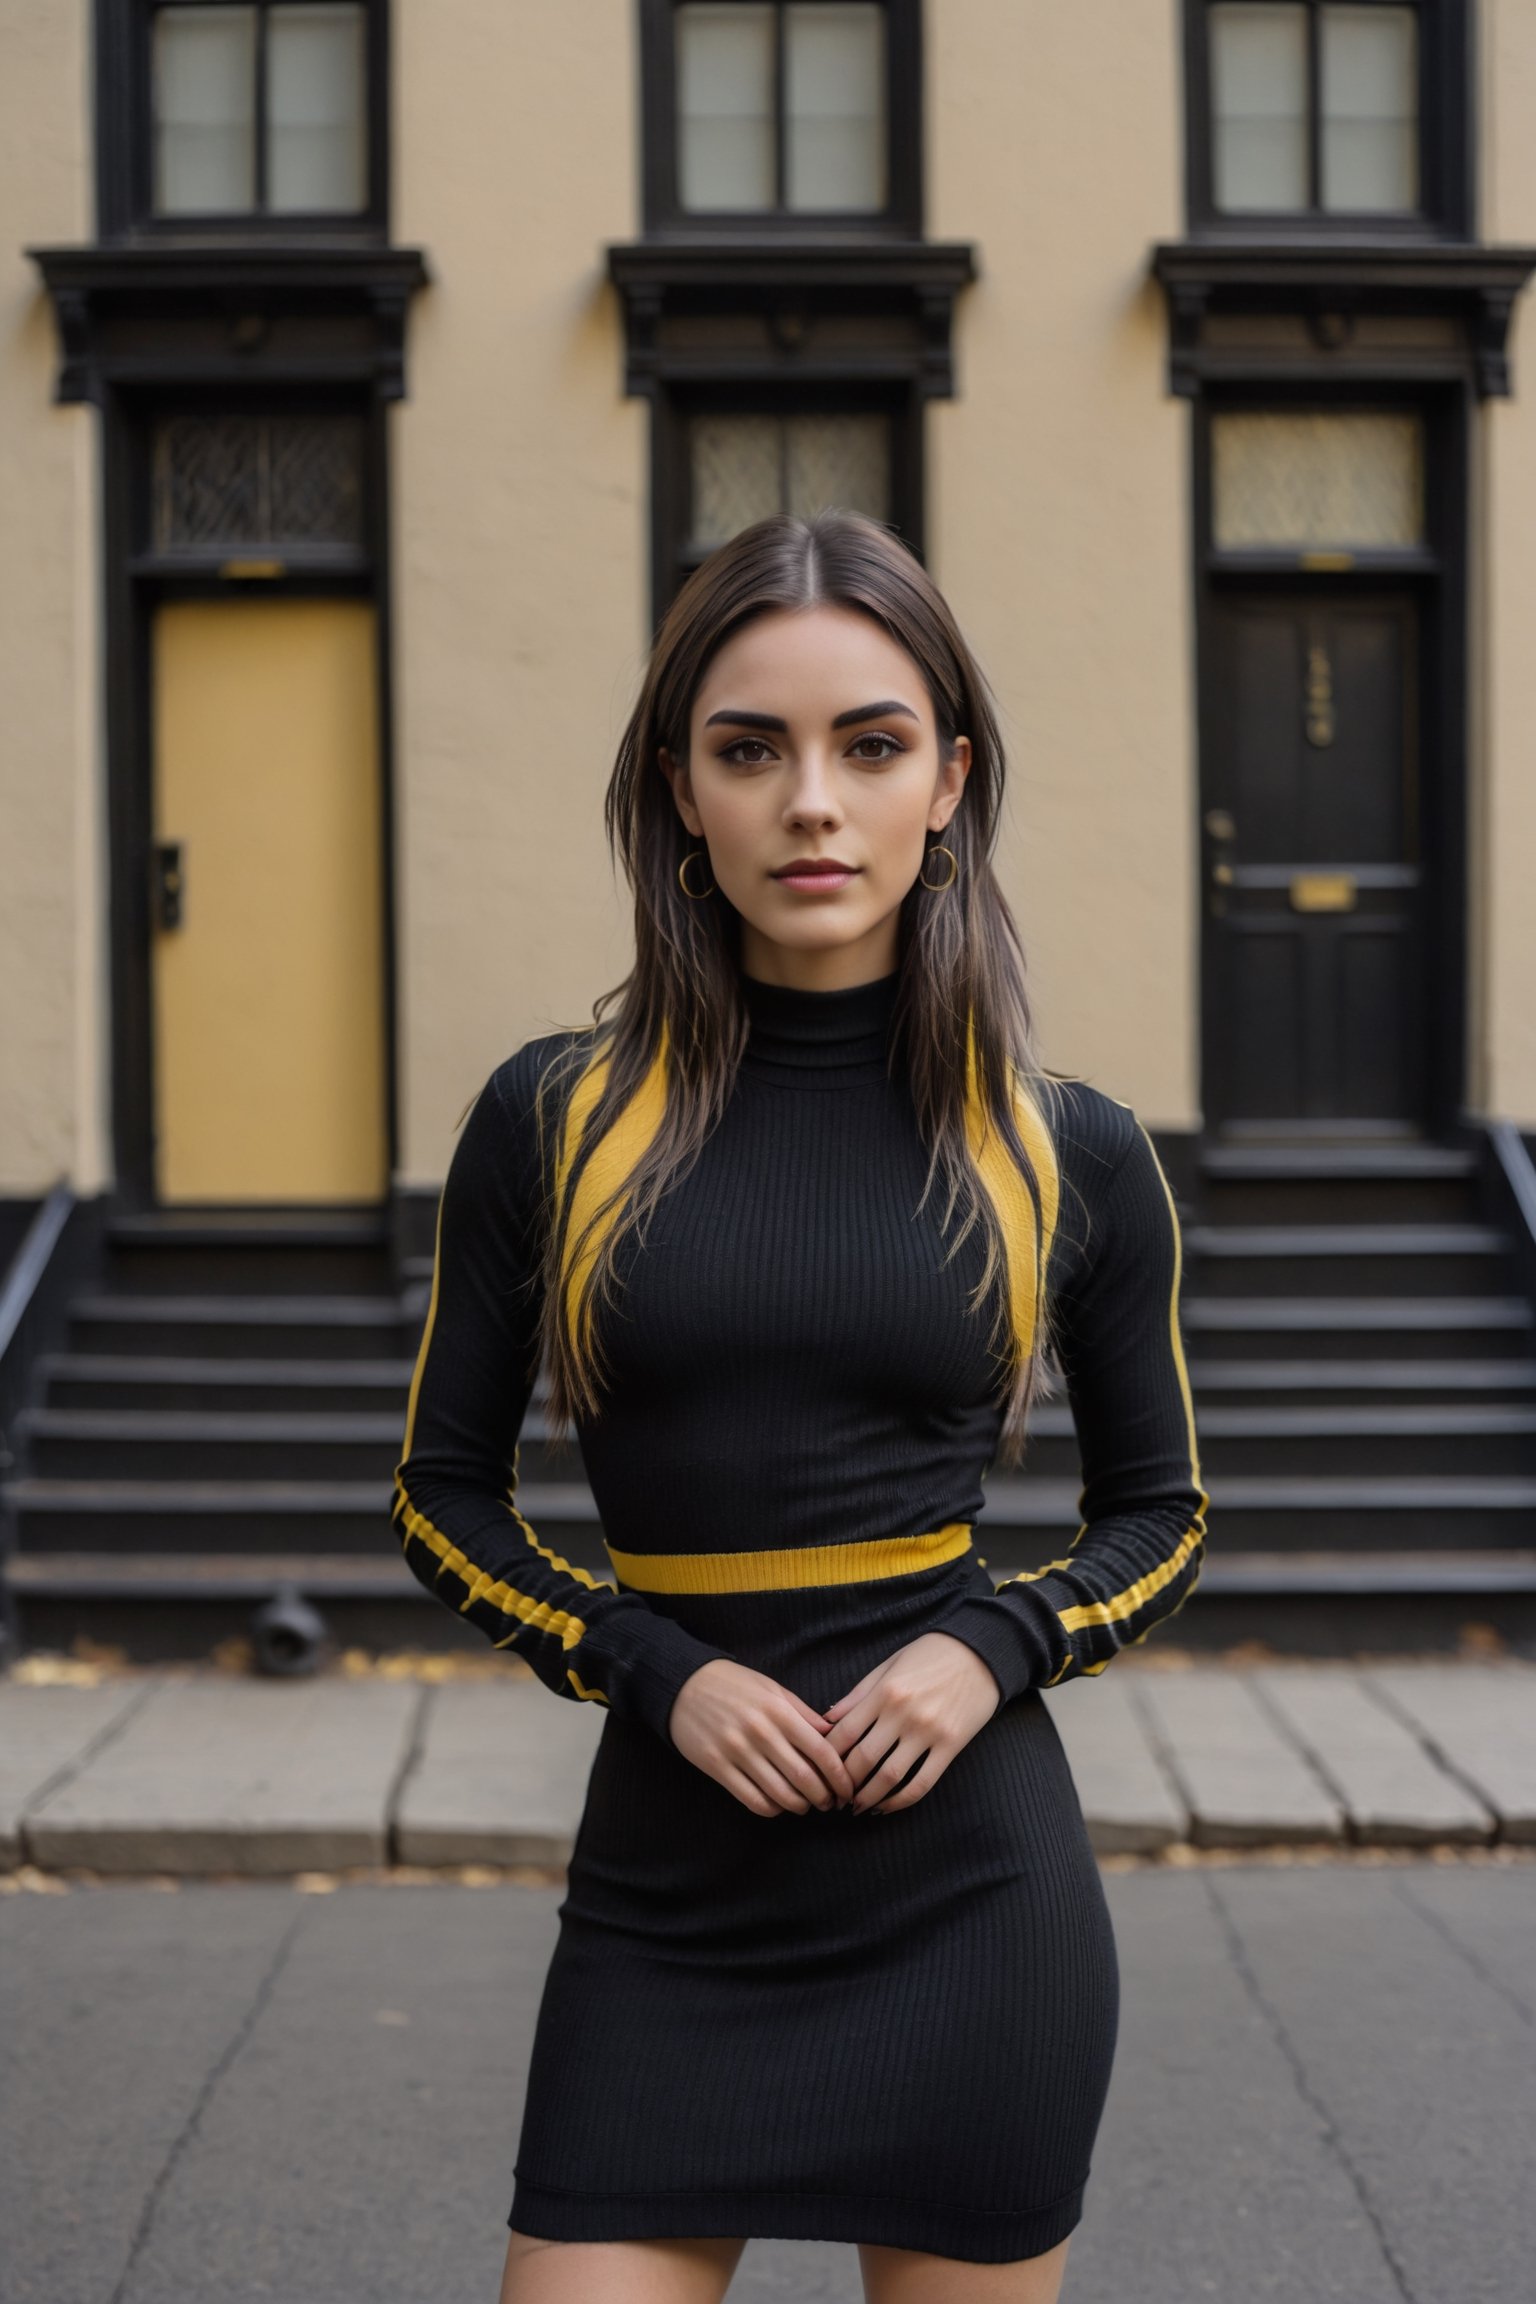 A photograph of an attractive woman wearing a black ribbed long sleeve dress with a small round neck and yellow trim. She is standing in front of an old building in the streets of New York. The photo has natural light, a soft color profile, is high quality with low contrast and a shallow depth of field.,renny the insta girl,Versace girl model